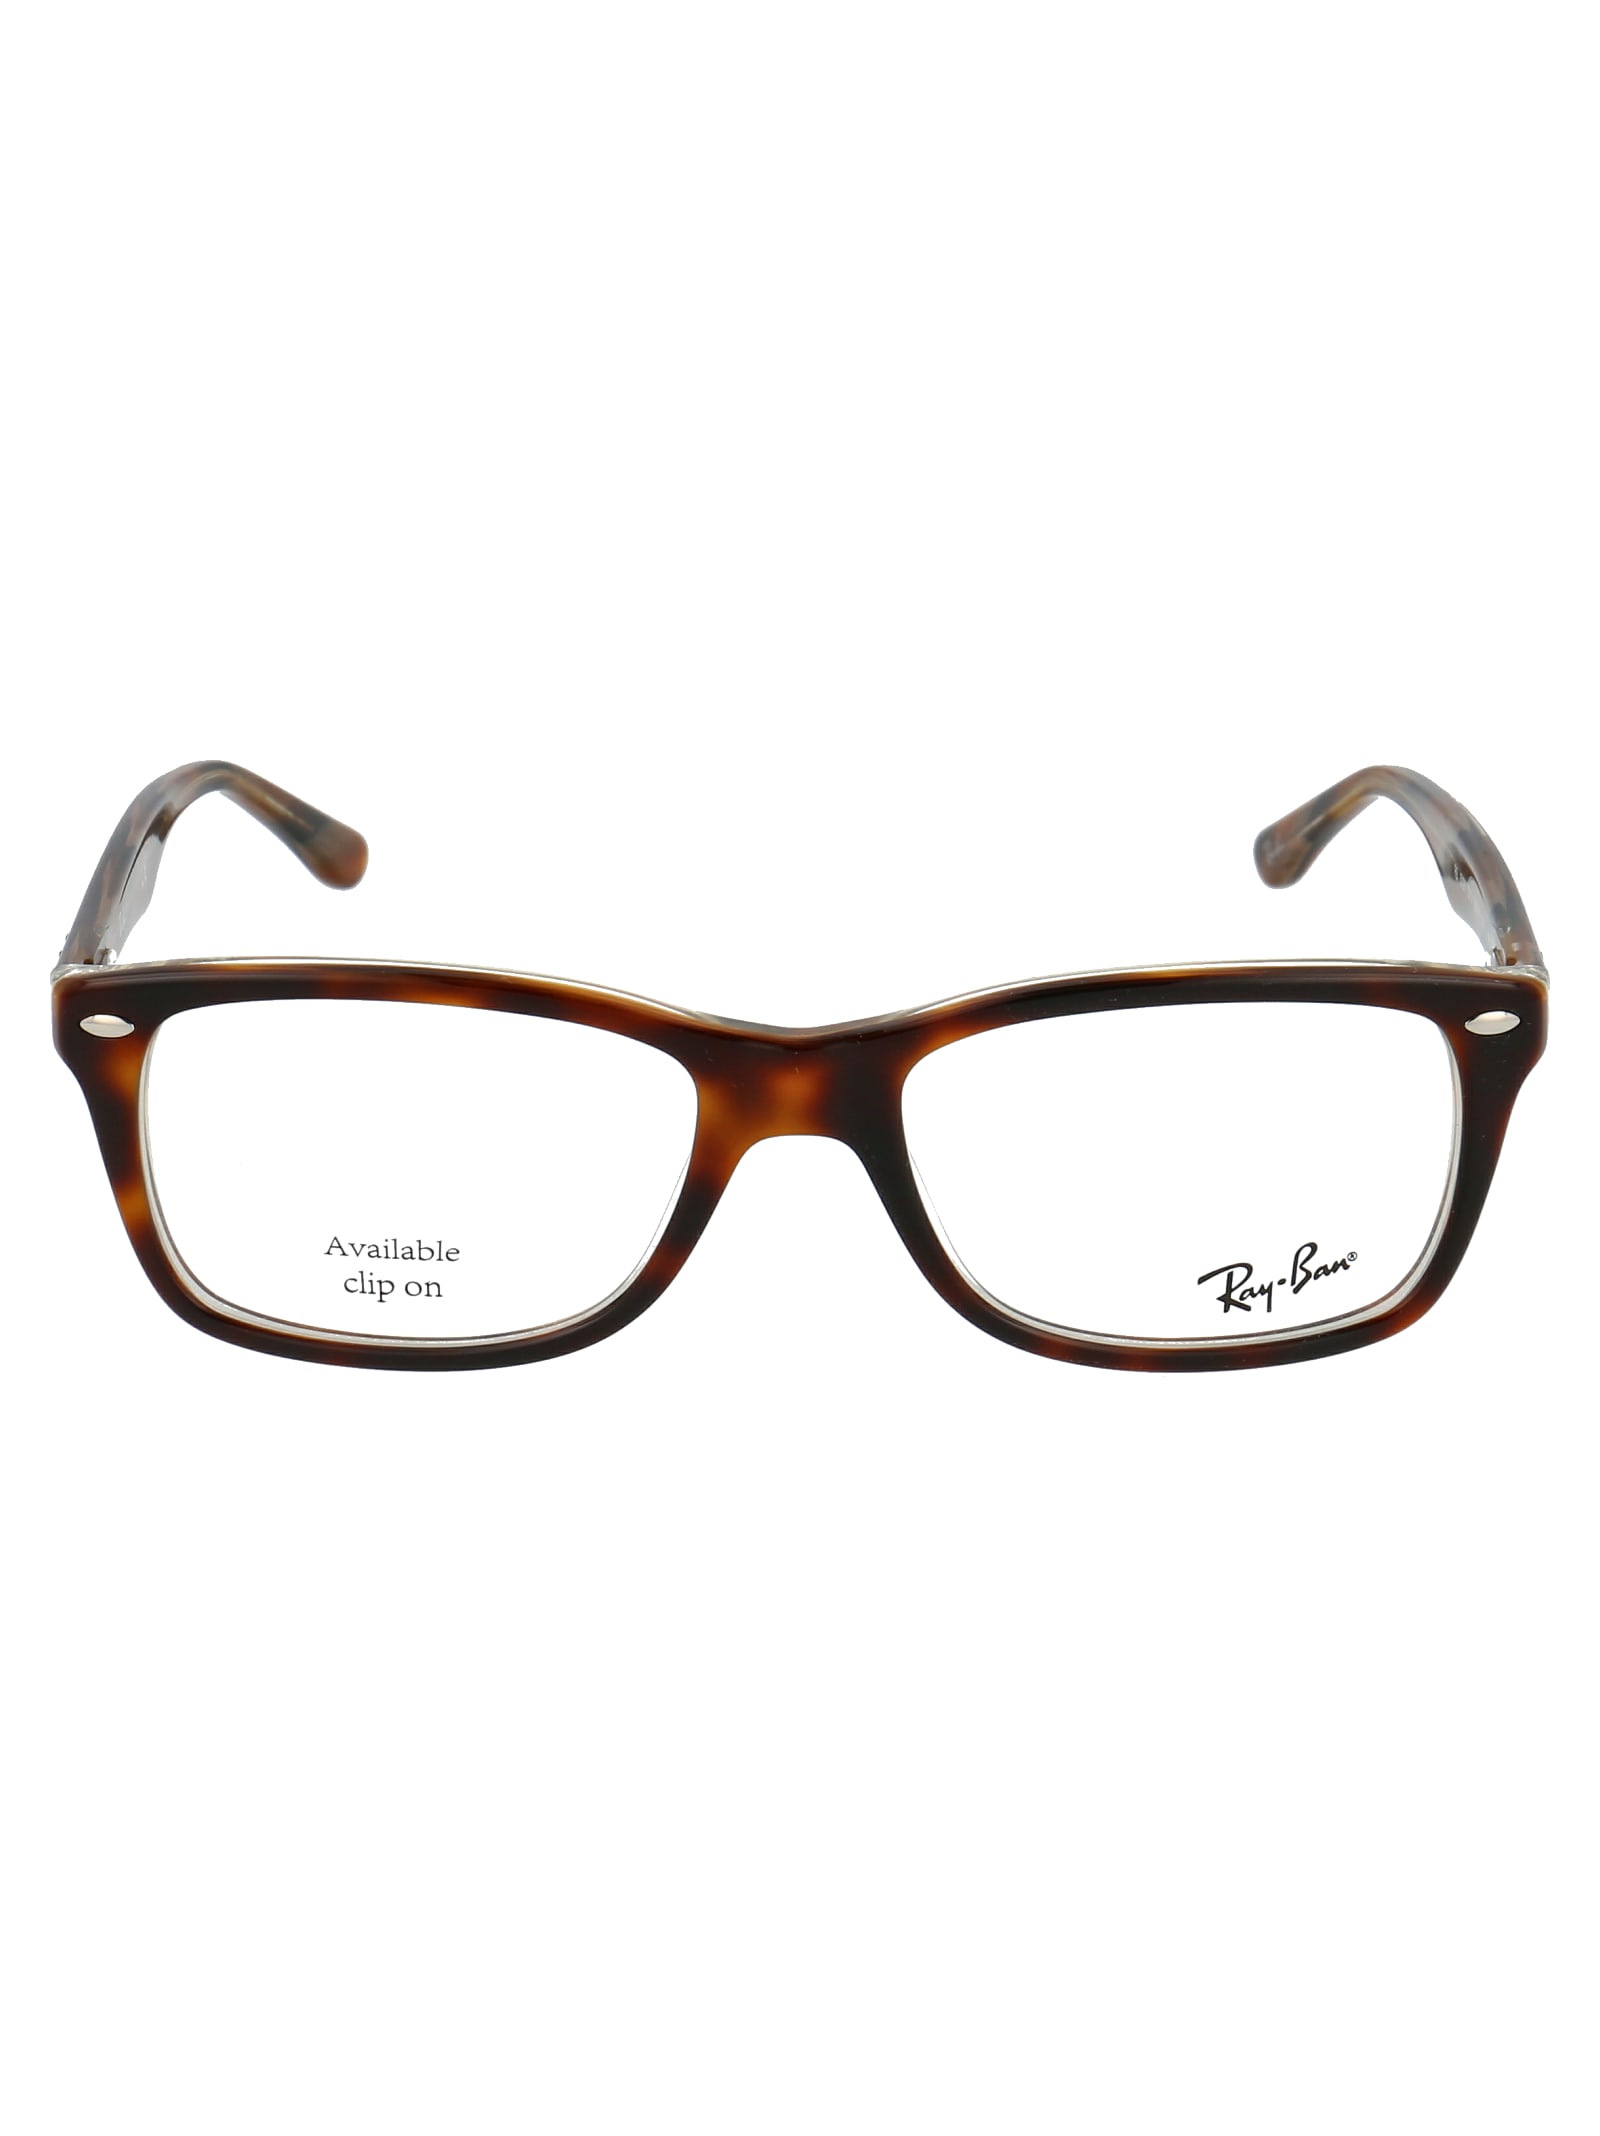 Ray Ban 0rx5228 Glasses In 5913 Havana/brown/yellow